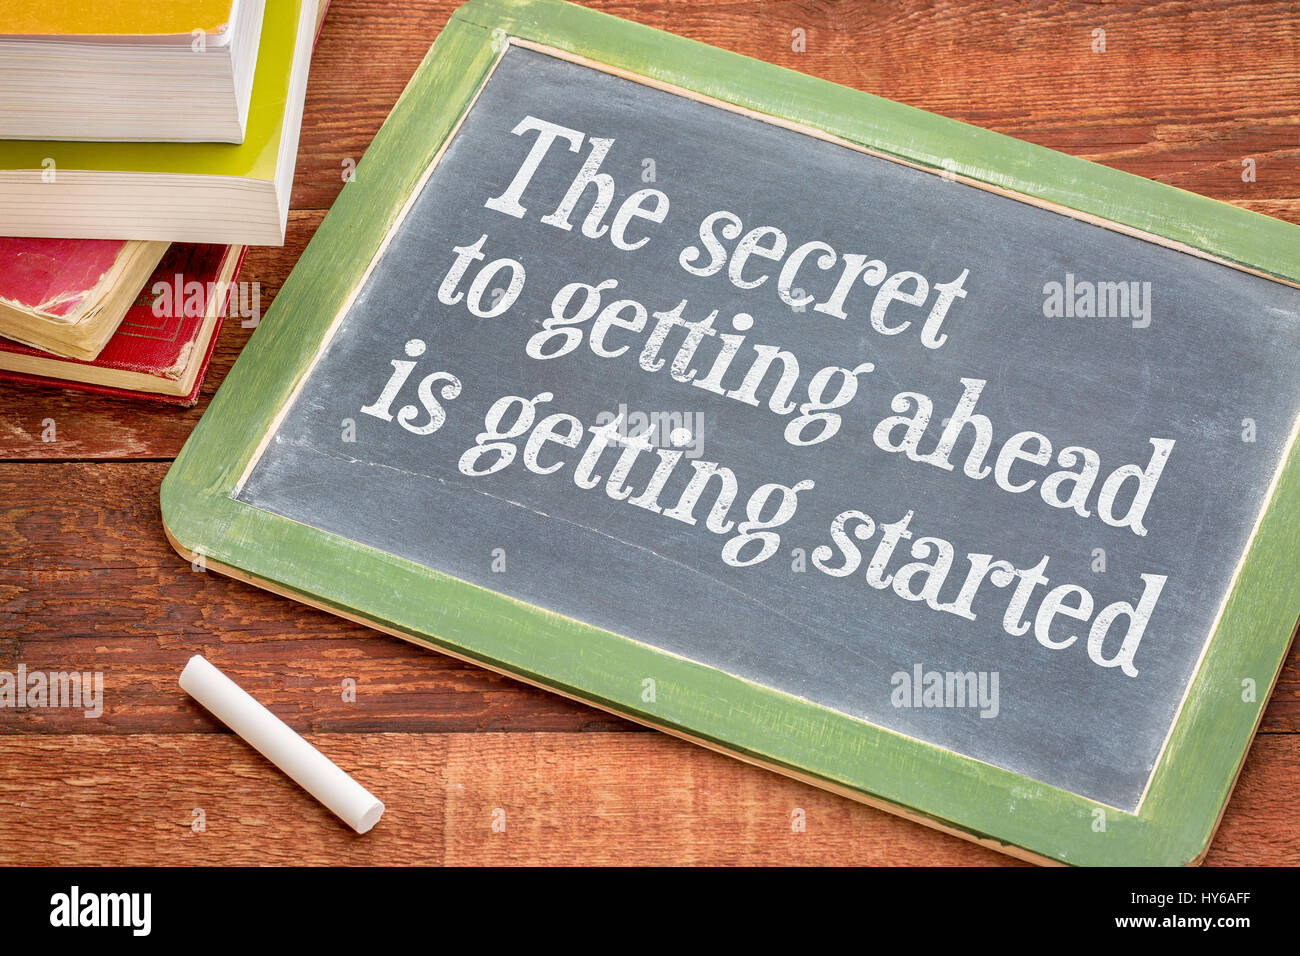 https://c8.alamy.com/comp/HY6AFF/the-secret-to-getting-ahead-is-getting-started-white-chalk-text-on-HY6AFF.jpg